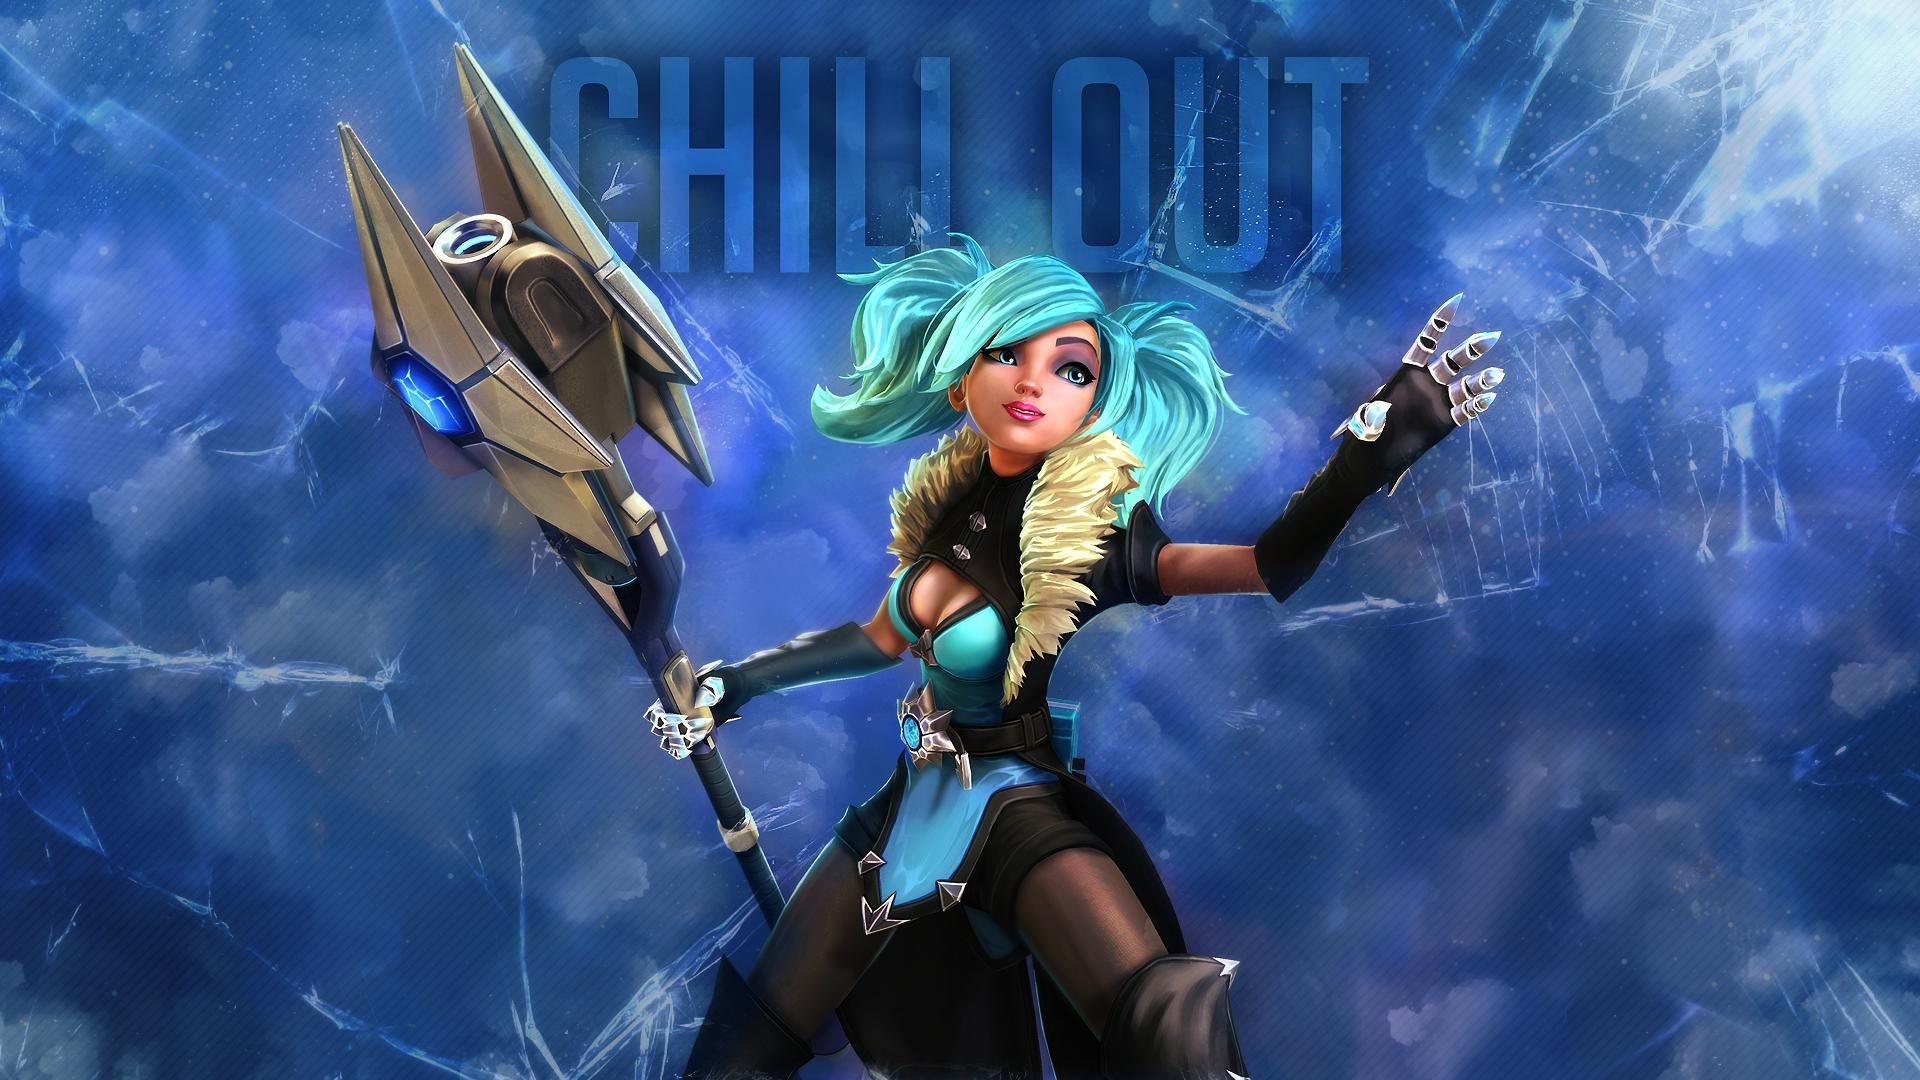 1920x1080 I made an Evie Wallpaper 1920 x 1080 Need #iPhone #6S #Plus #